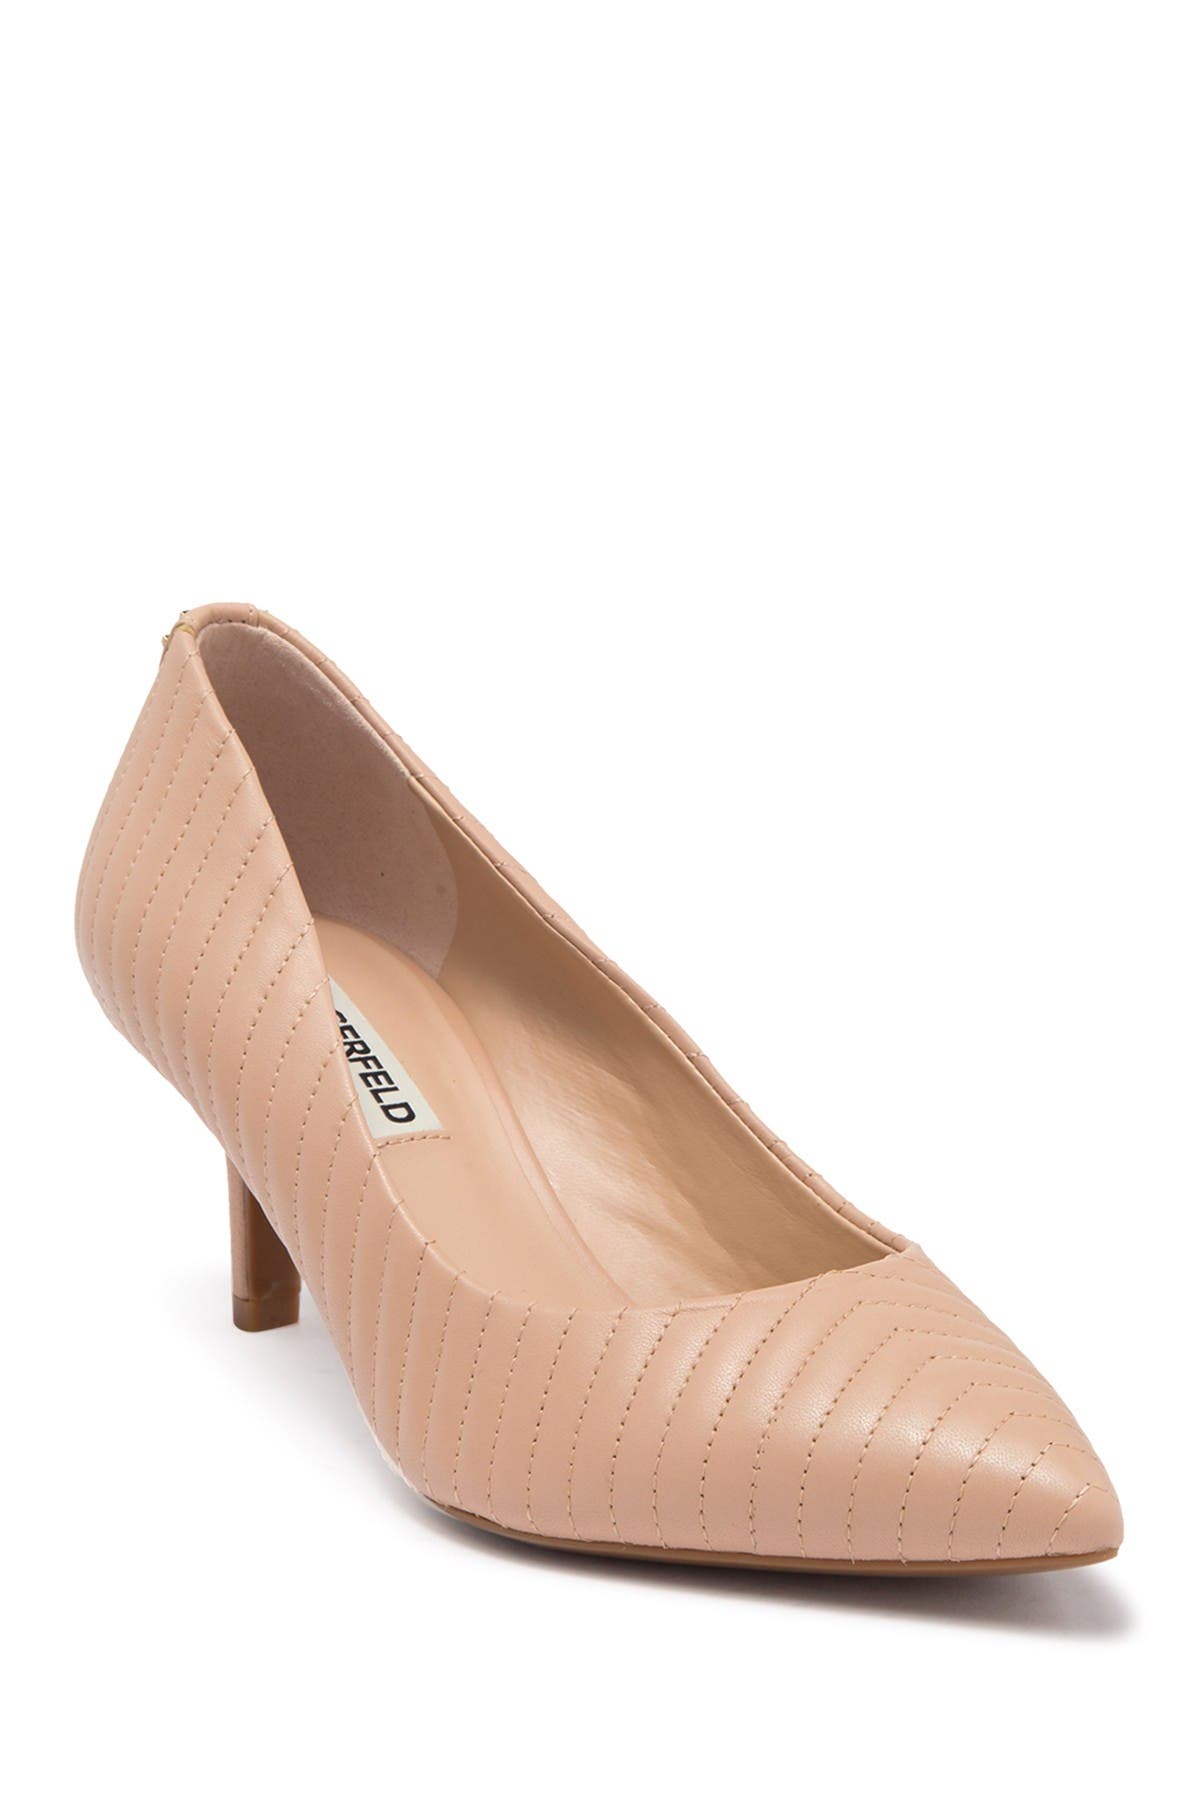 Karl Lagerfeld Rosette Quilted Pointed Toe Pump In Gold1